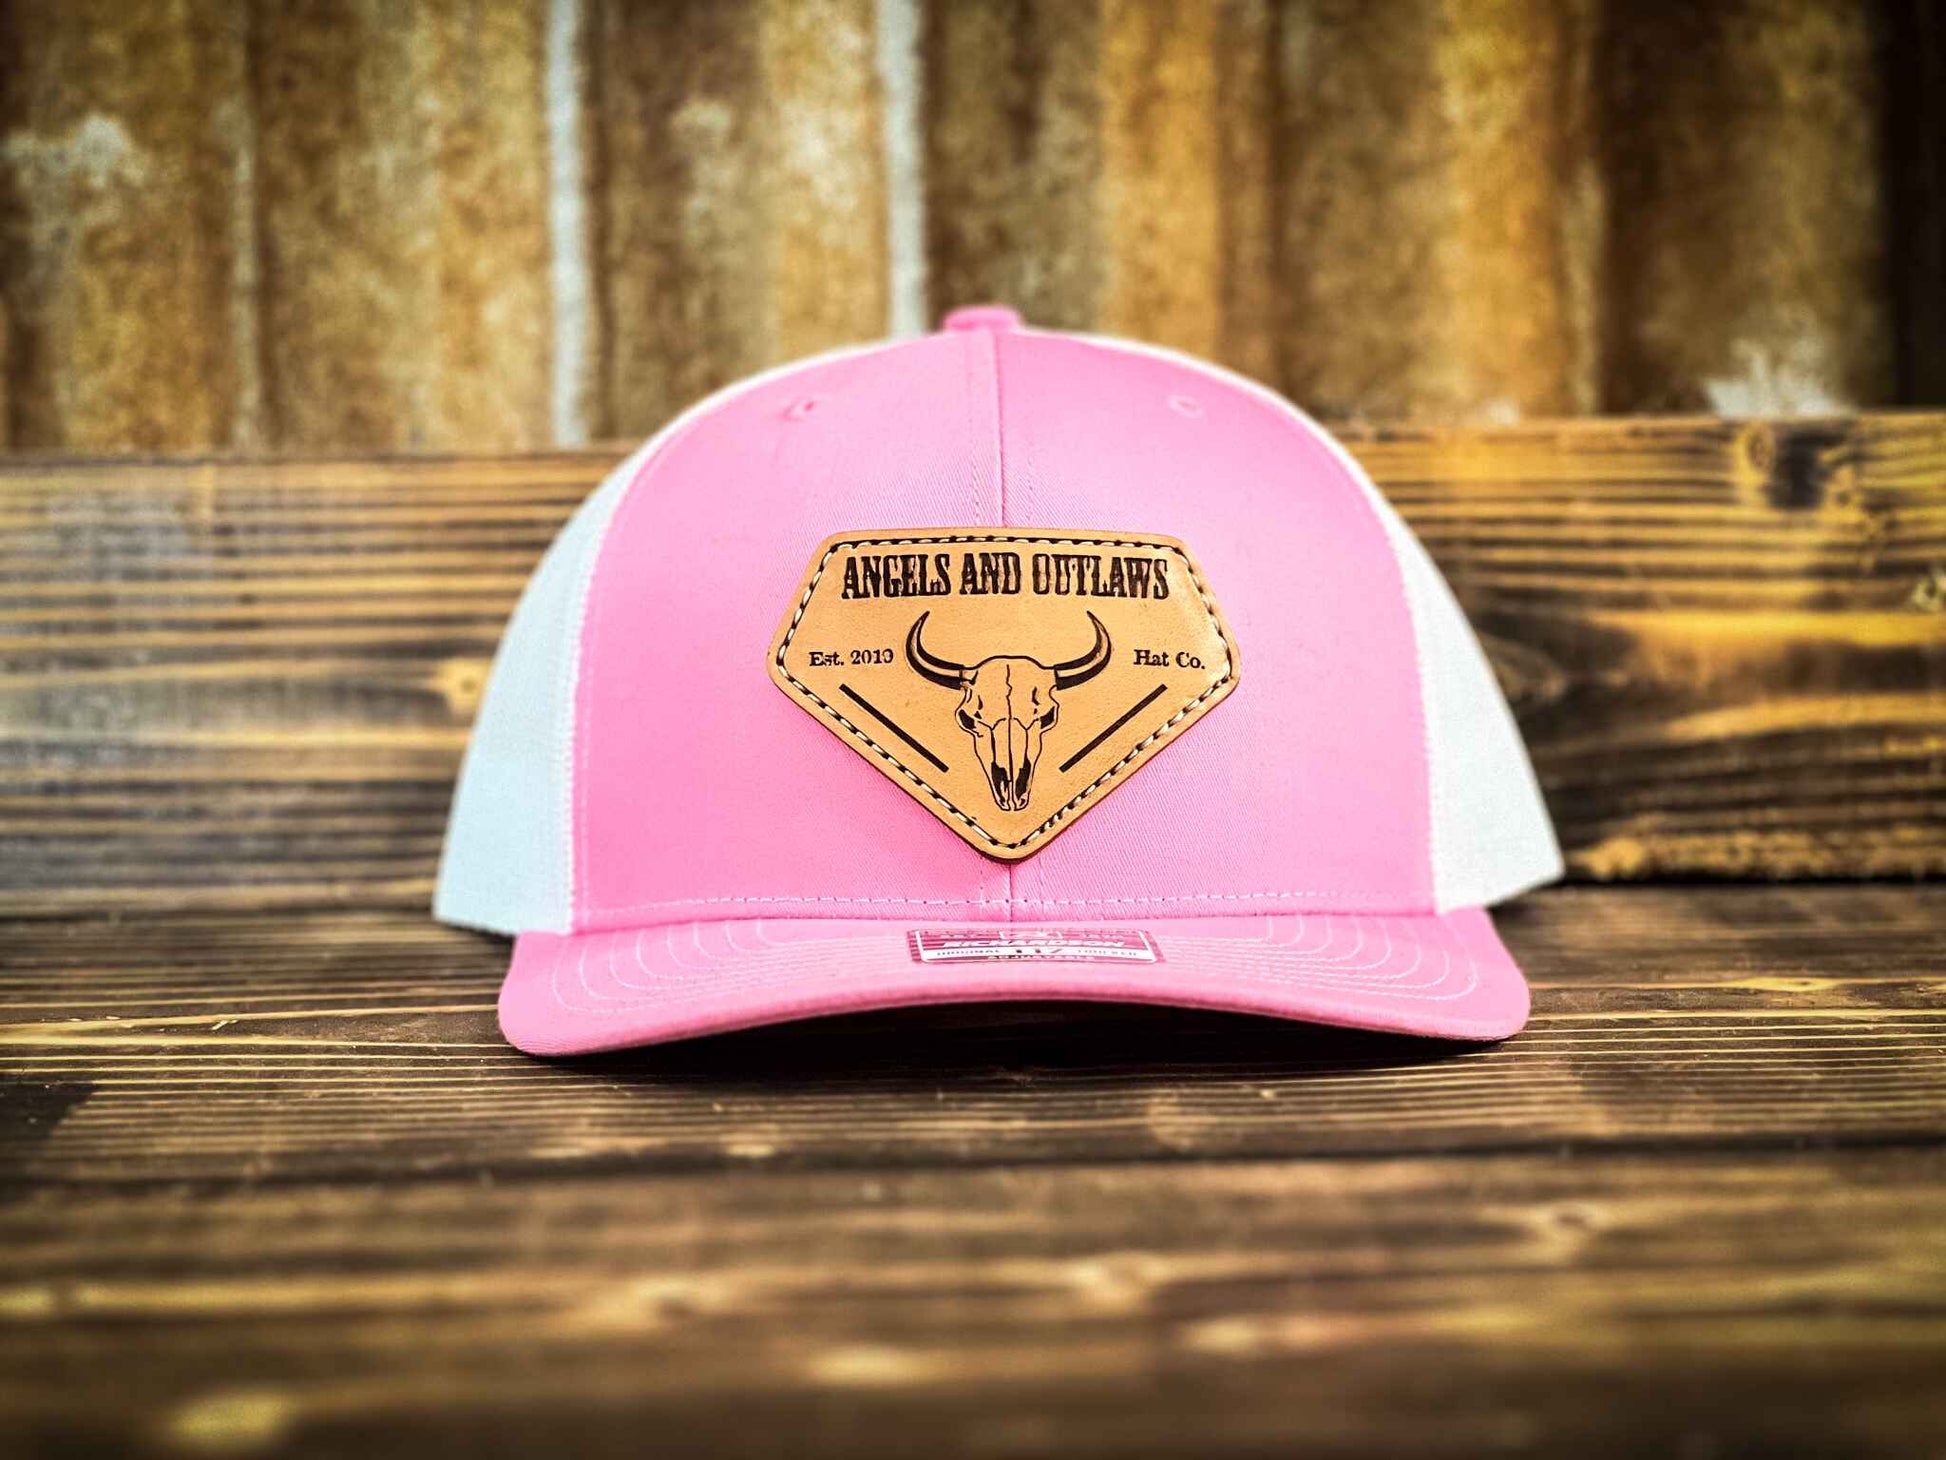 Pink Front white back Mesh back trucker hat with Angels and Outlaws name and a bison skull engraved on a leather patch